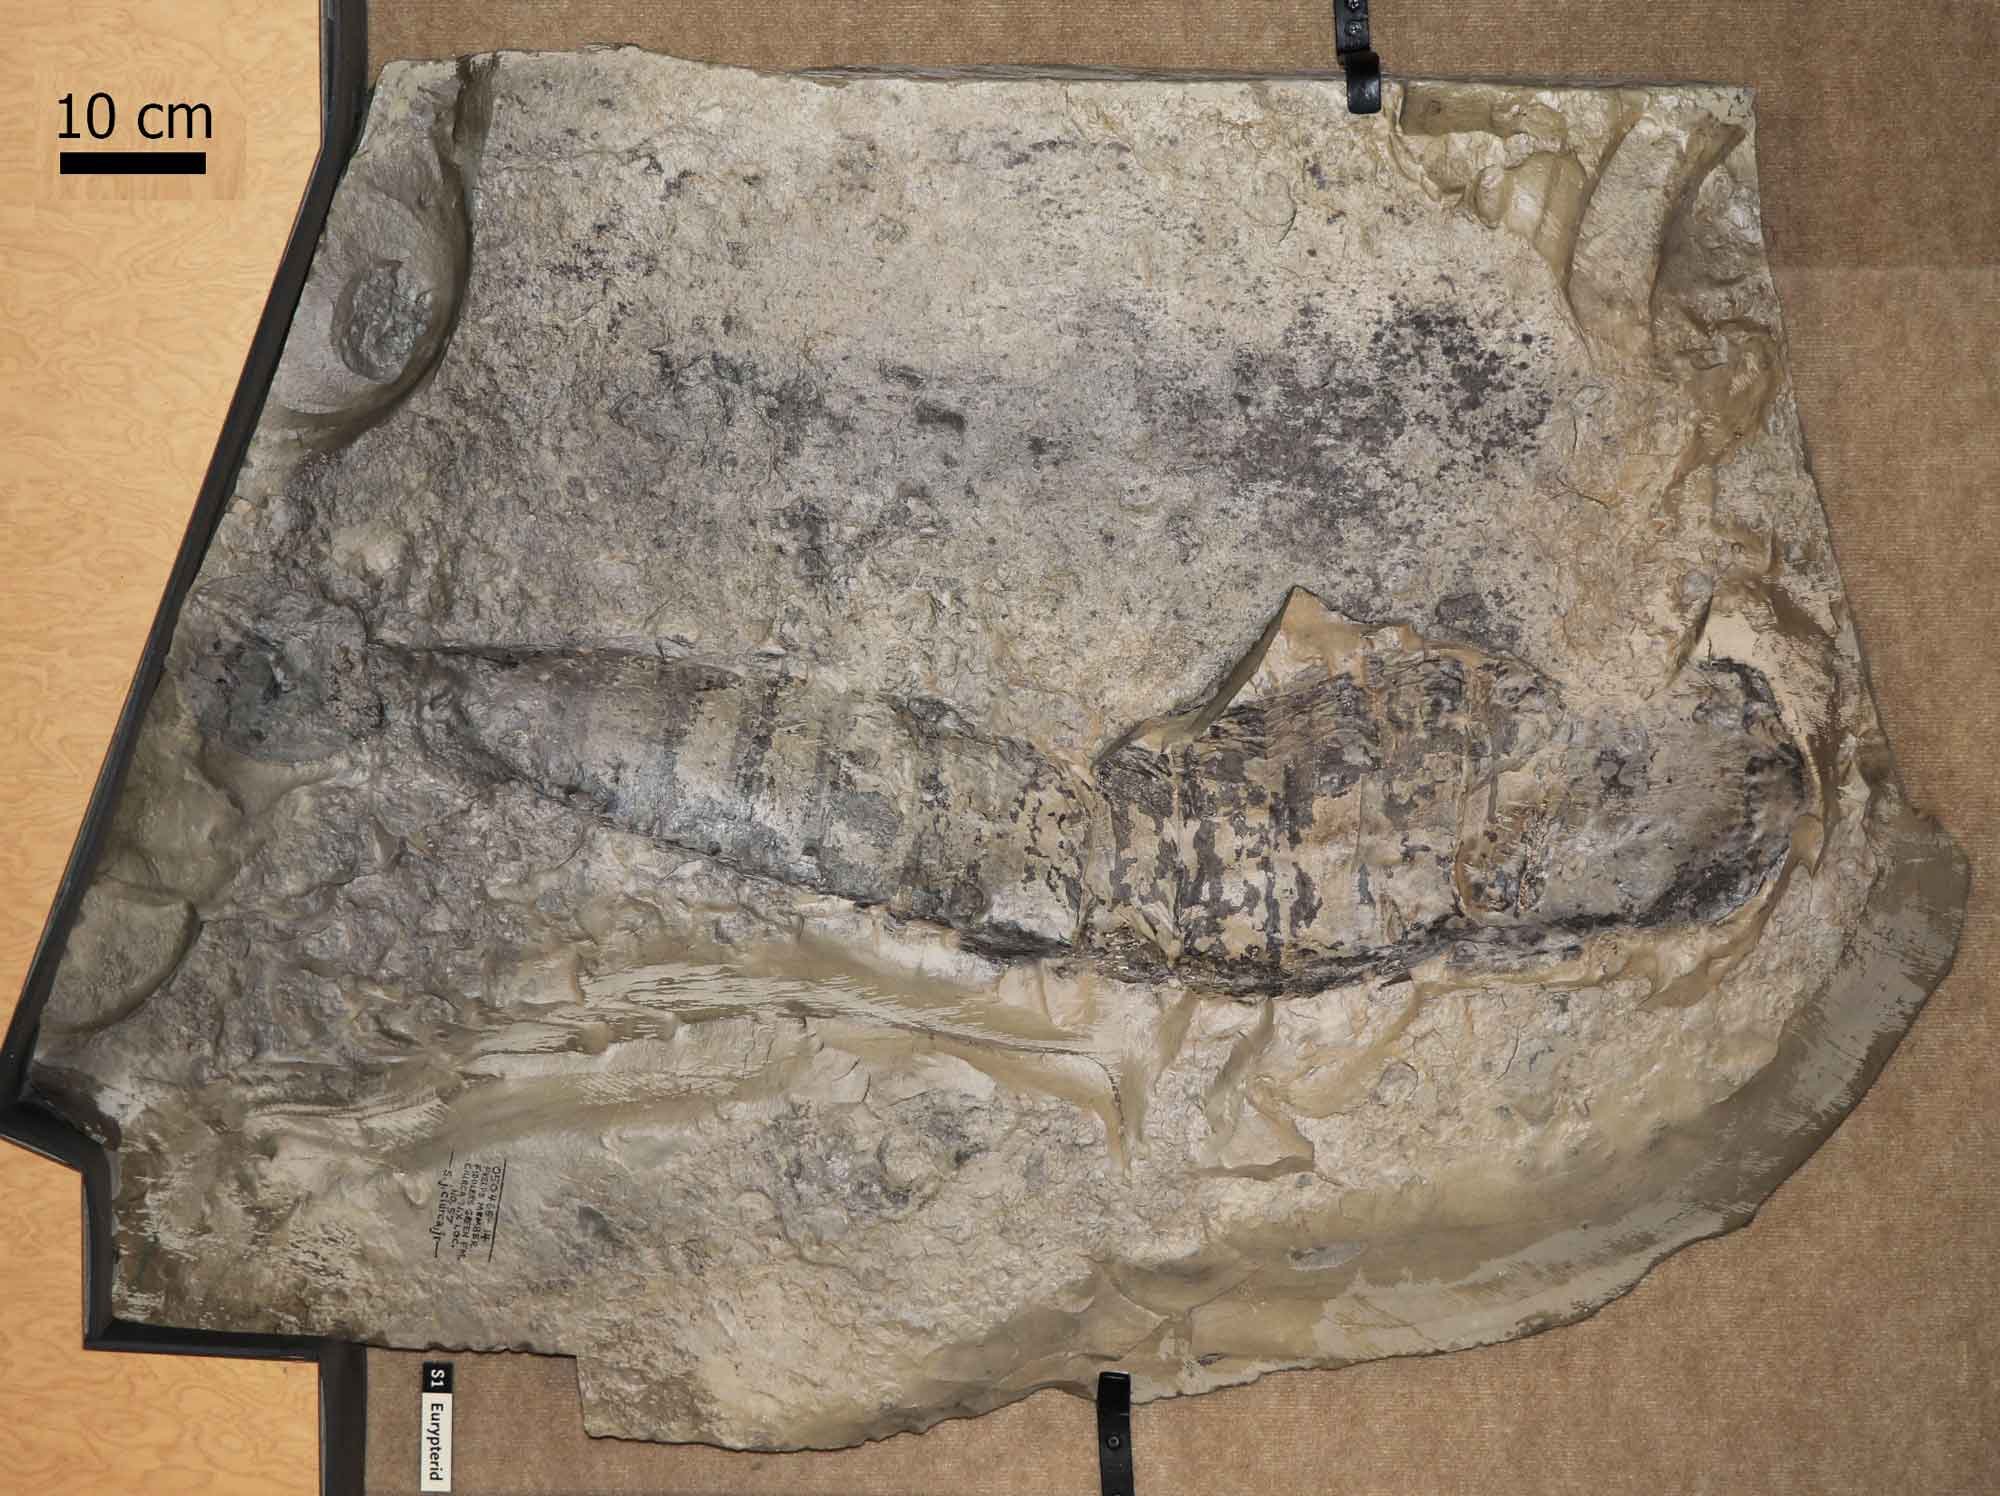 Photograph of the giant eurypterid Acutiramus macrophthalmus on display at the Museum of the Earth, Ithaca, New York.